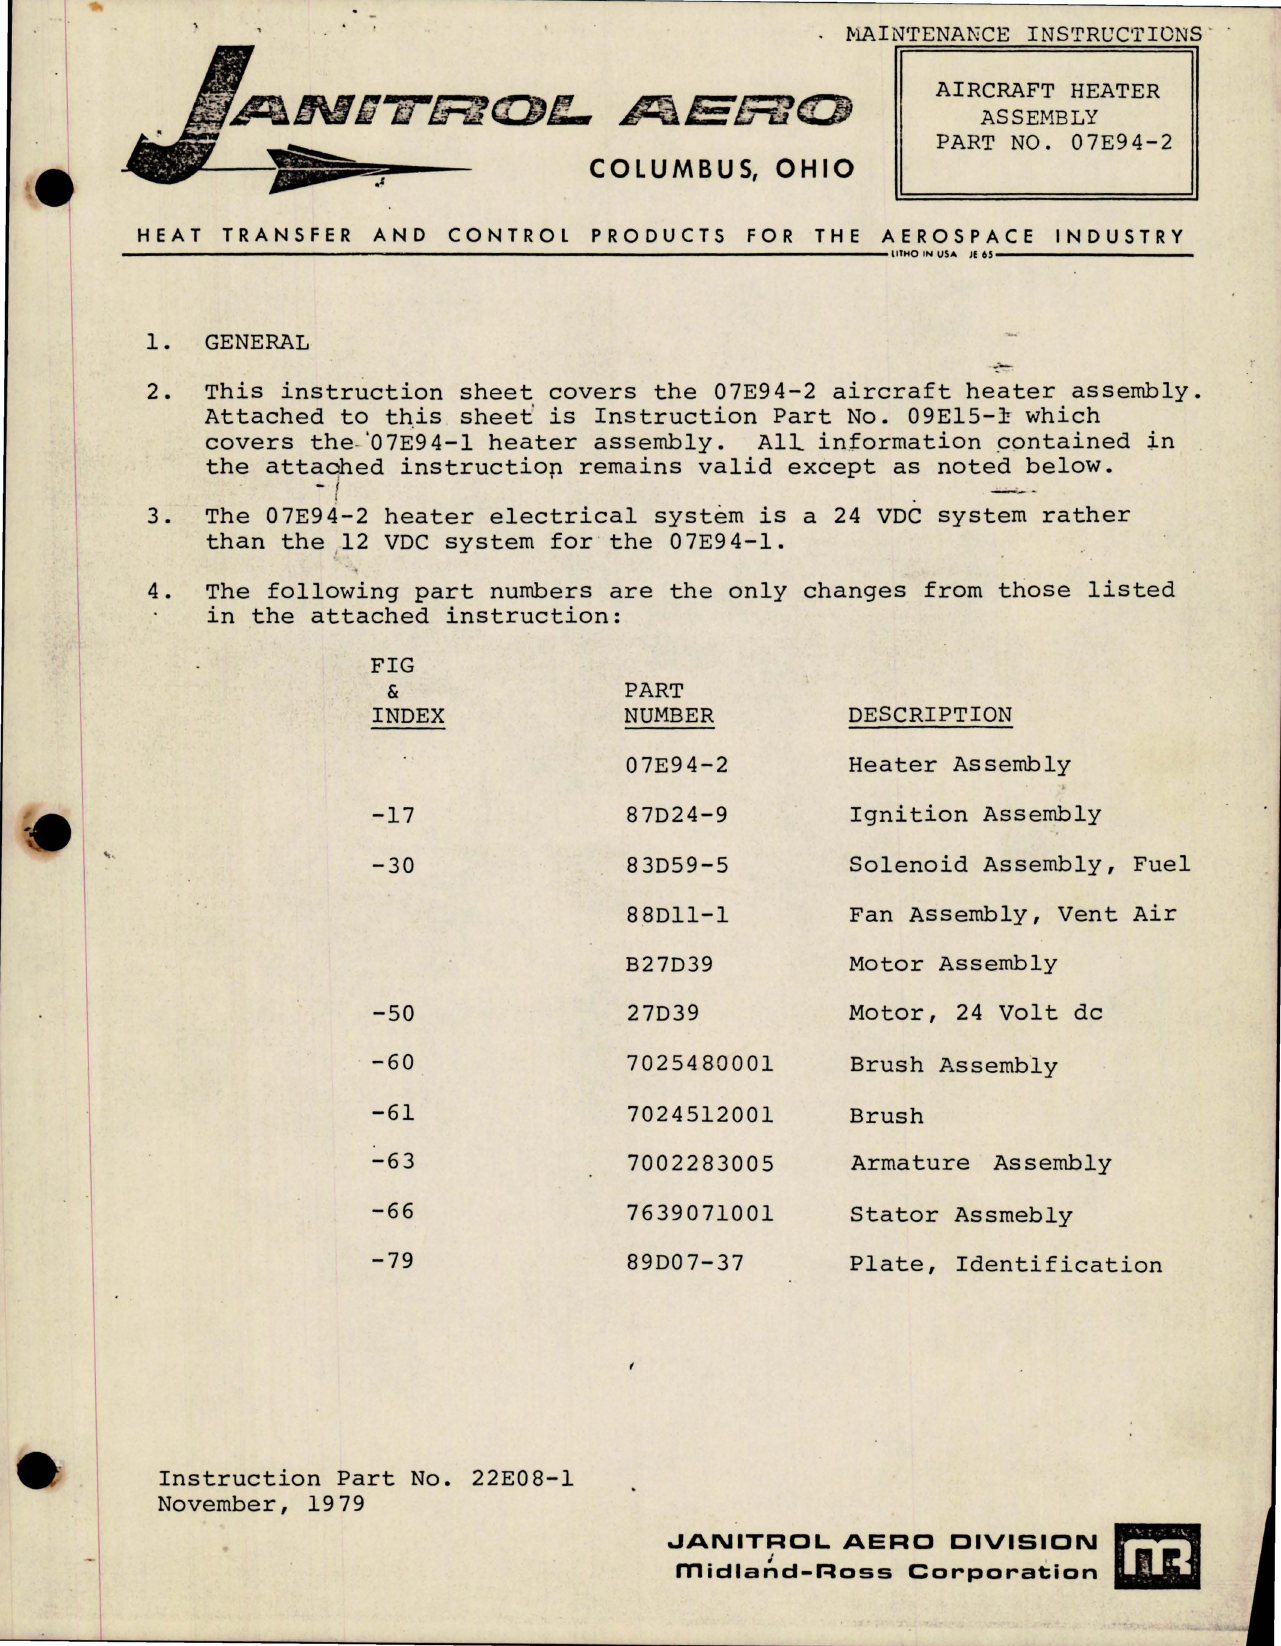 Sample page 1 from AirCorps Library document: Maintenance Instructions for Aircraft Heater Assembly - Part 07E94-2 